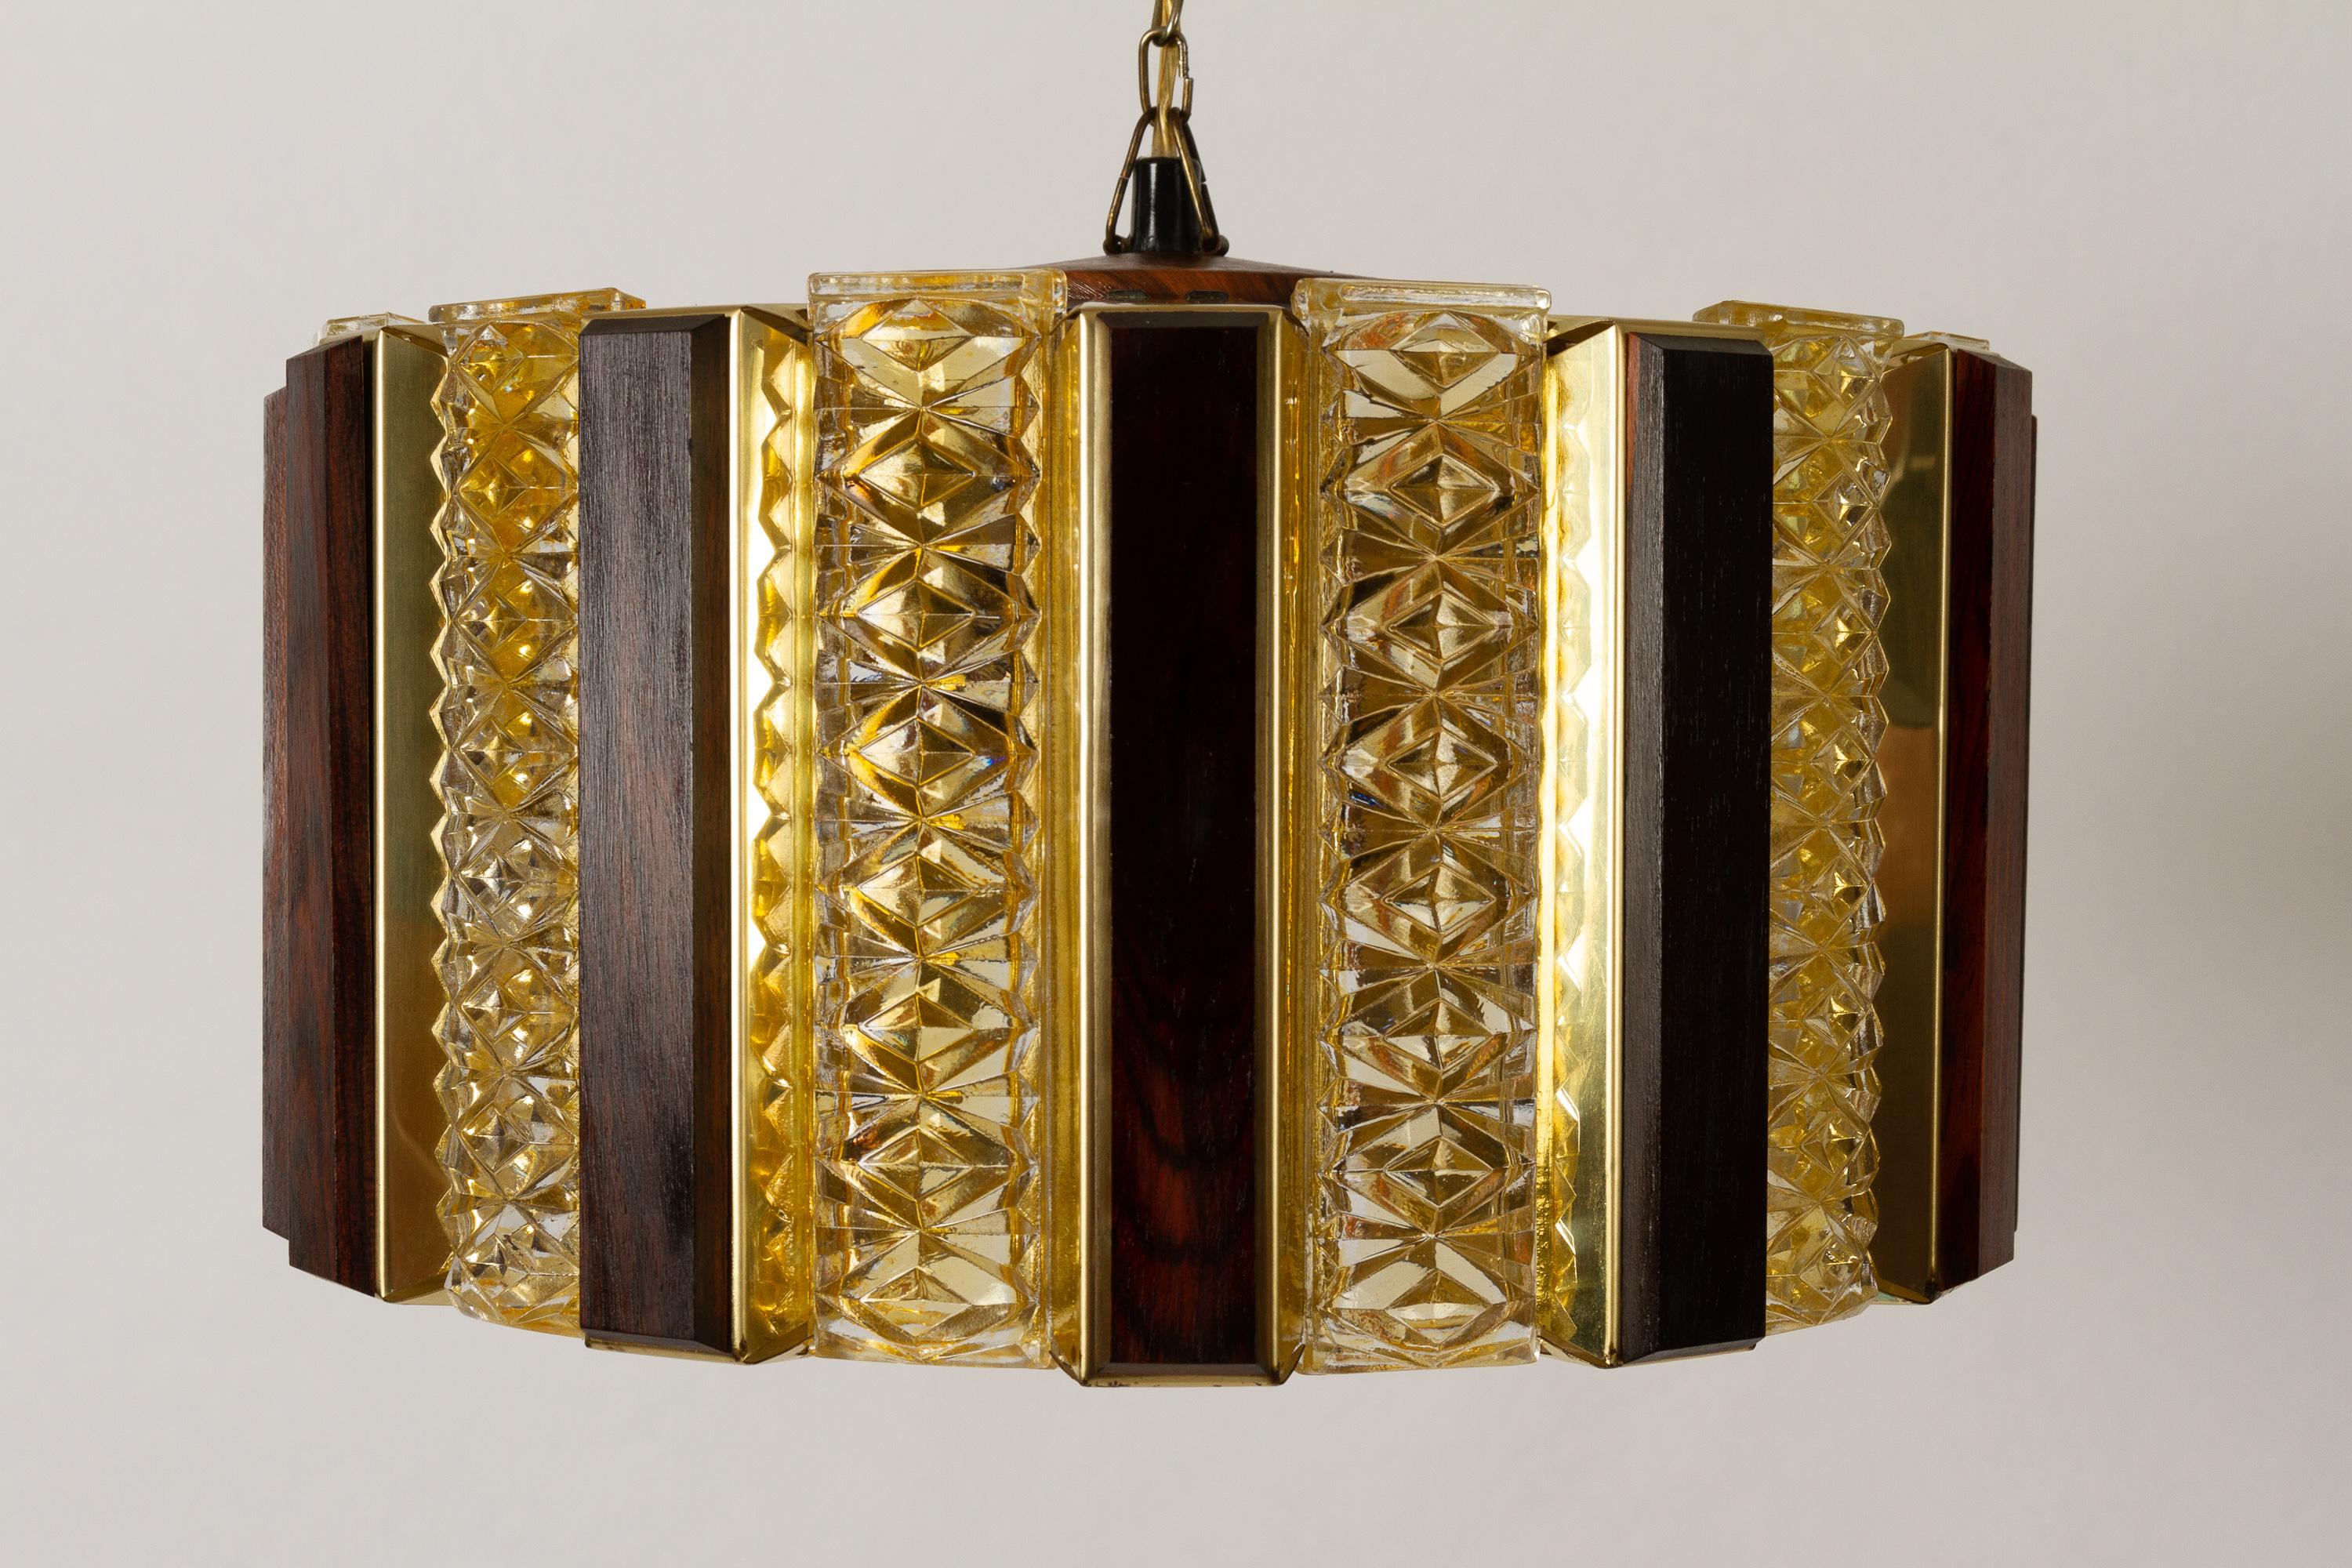 Vintage Danish ceiling pendant by Werner Schou for Coronell Elektro, 1960s.
Scandinavian Modern ceiling lamp in brass, glass and teak. Round with alternating yellow/amber colored glass bricks and wooden slats mounted on brass plates. Lamp is